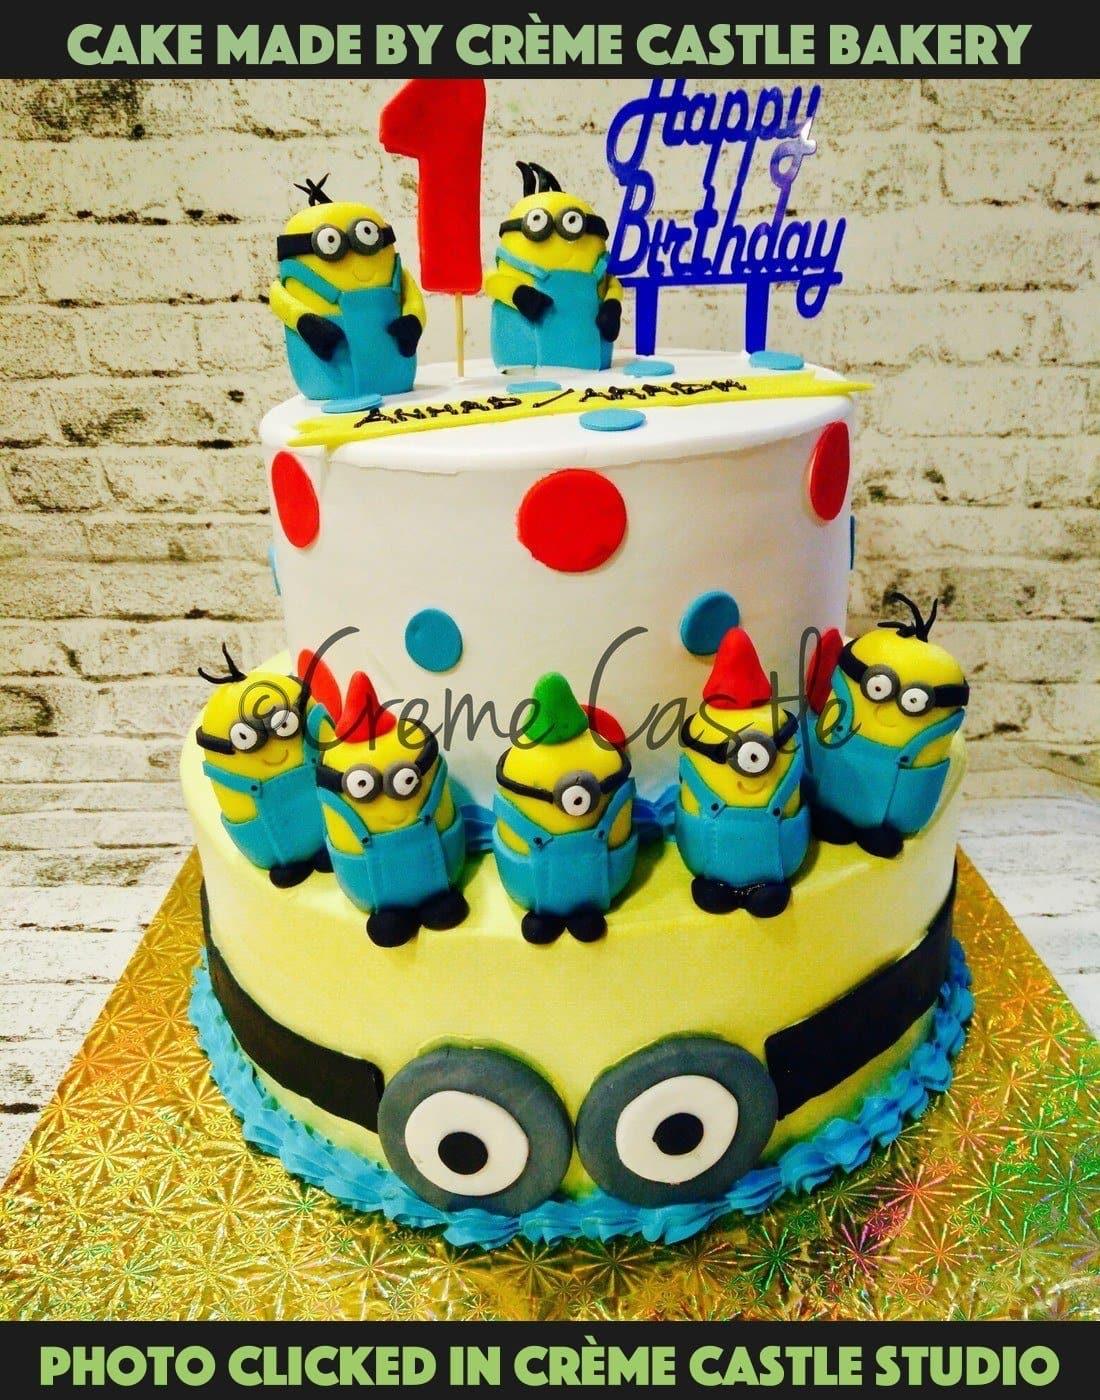 Jacobs Oven - #minion theme cake #Homemade #JacobsOven #Freshcream #cake  #celebration #Birthday We Assure Quality & Quantity 🎂 ≥ 1 Will bake only  on order | Make your day special! To Book